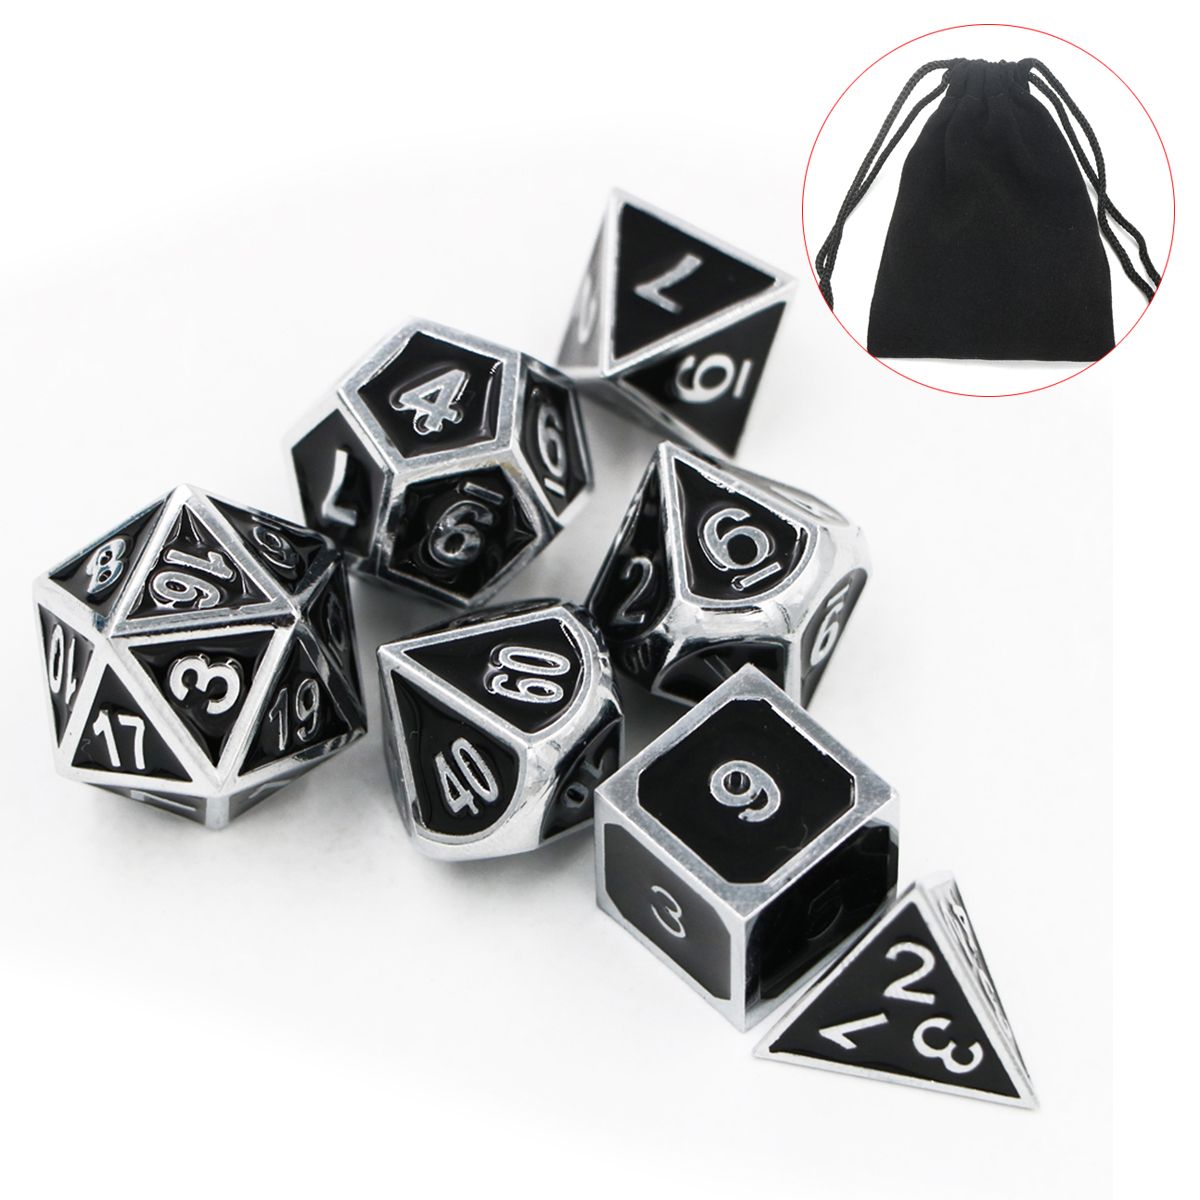 7pcs-Heavy-Metal-Polyhedral-Dices-Multisided-Dices-Set-RPG-With-Bag-1391321